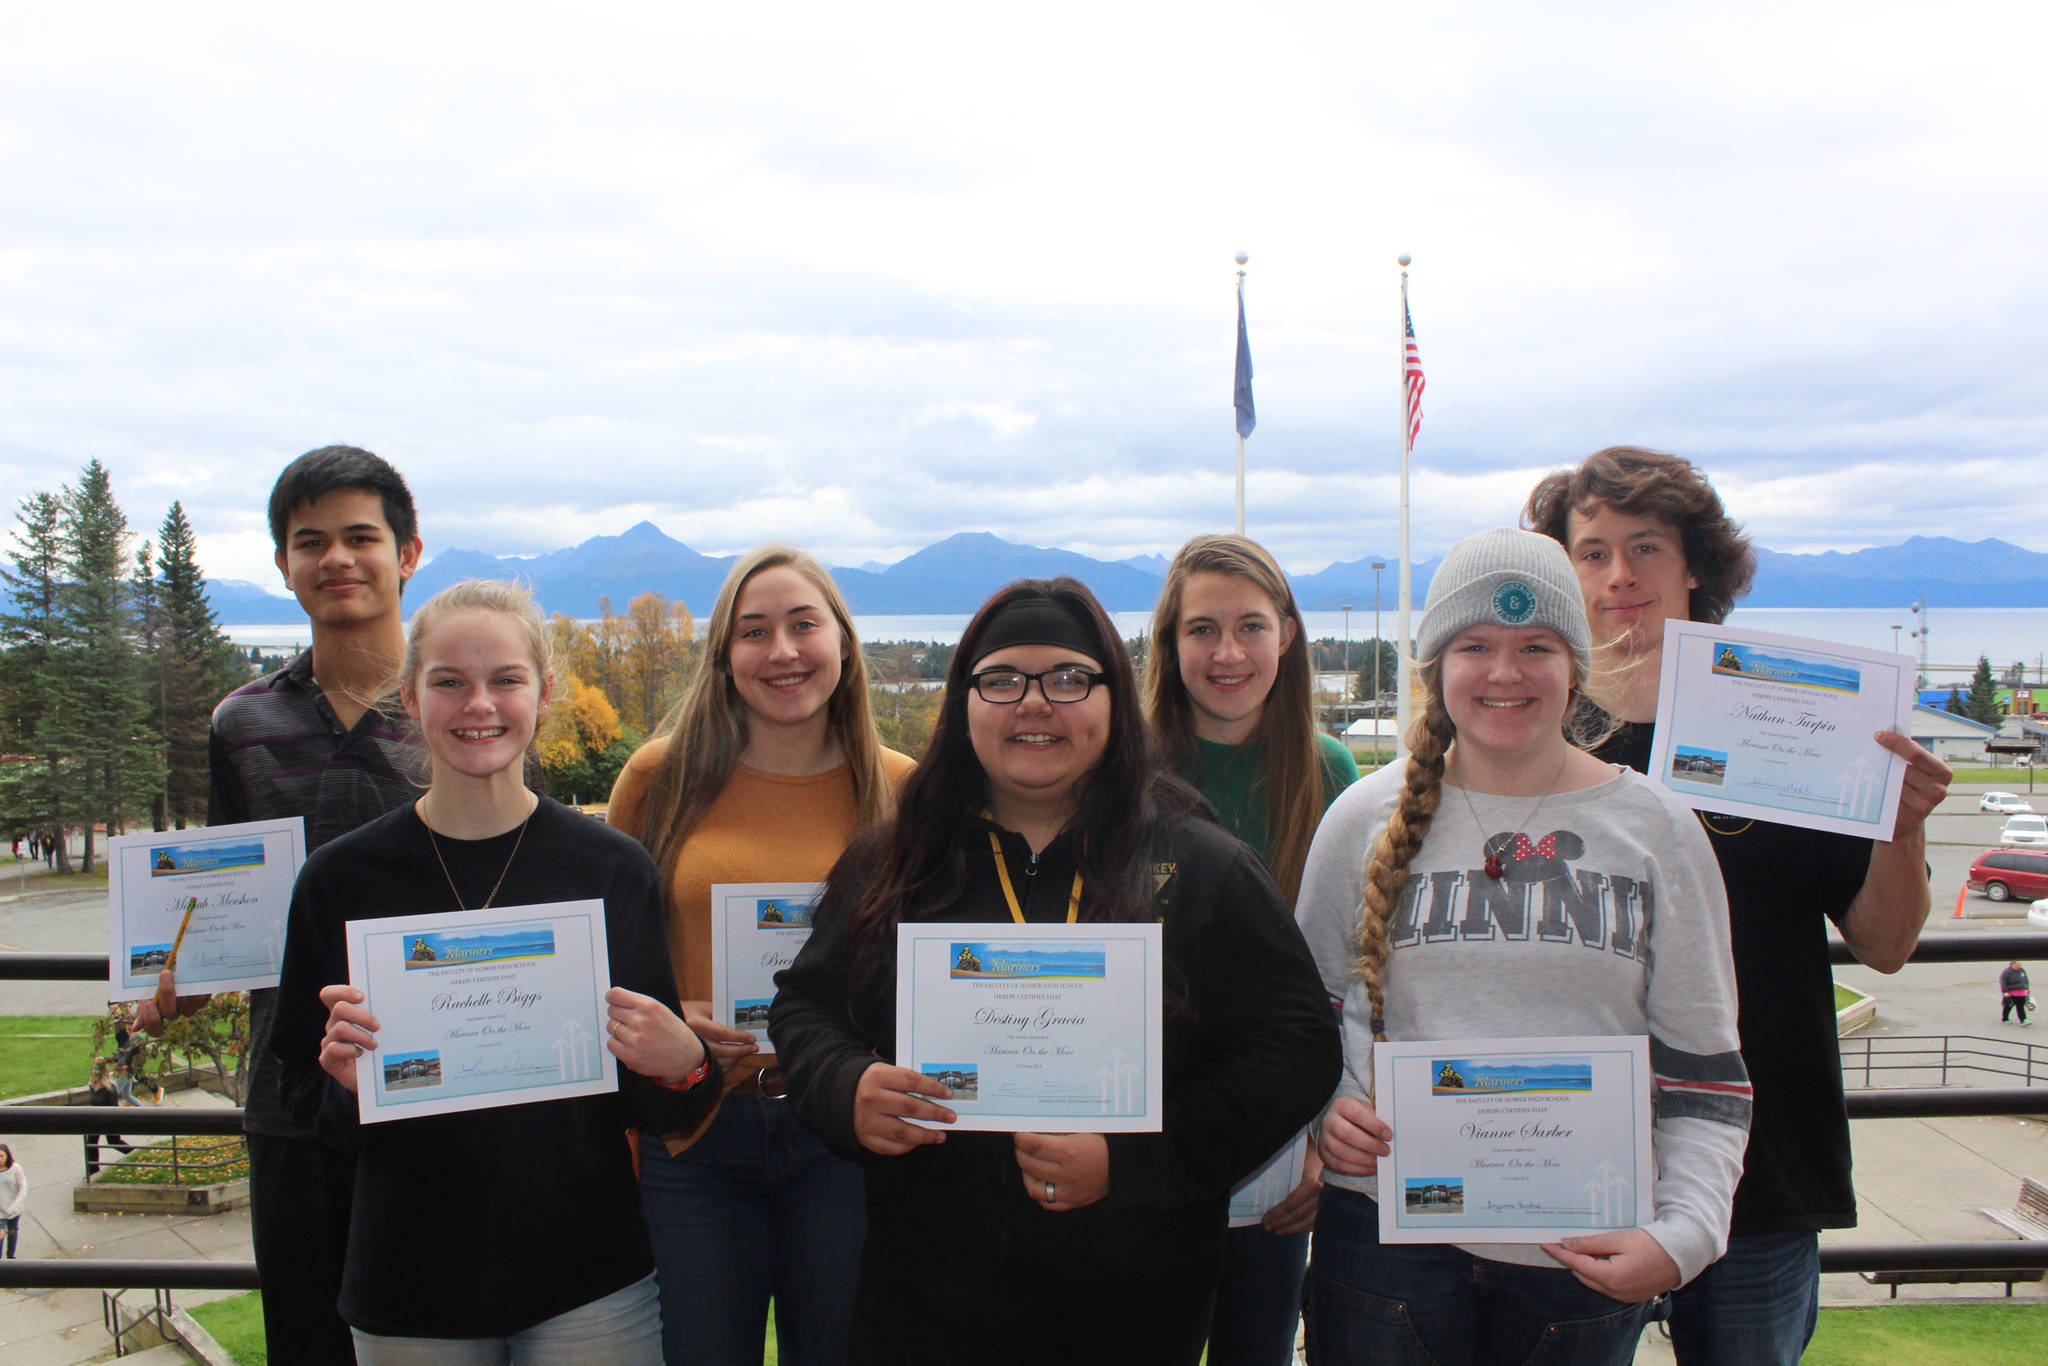 <span class="neFMT neFMT_PhotoCredit">Photo submitted</span>                                First quarter winners were (pictured left to right): Micah Mershon, Rachelle Biggs, Brenna McCarron, Destiny Gracia, Brita Restad, Vianne Sarber, Nate Turpin and Gavin Maupin (not pictured).